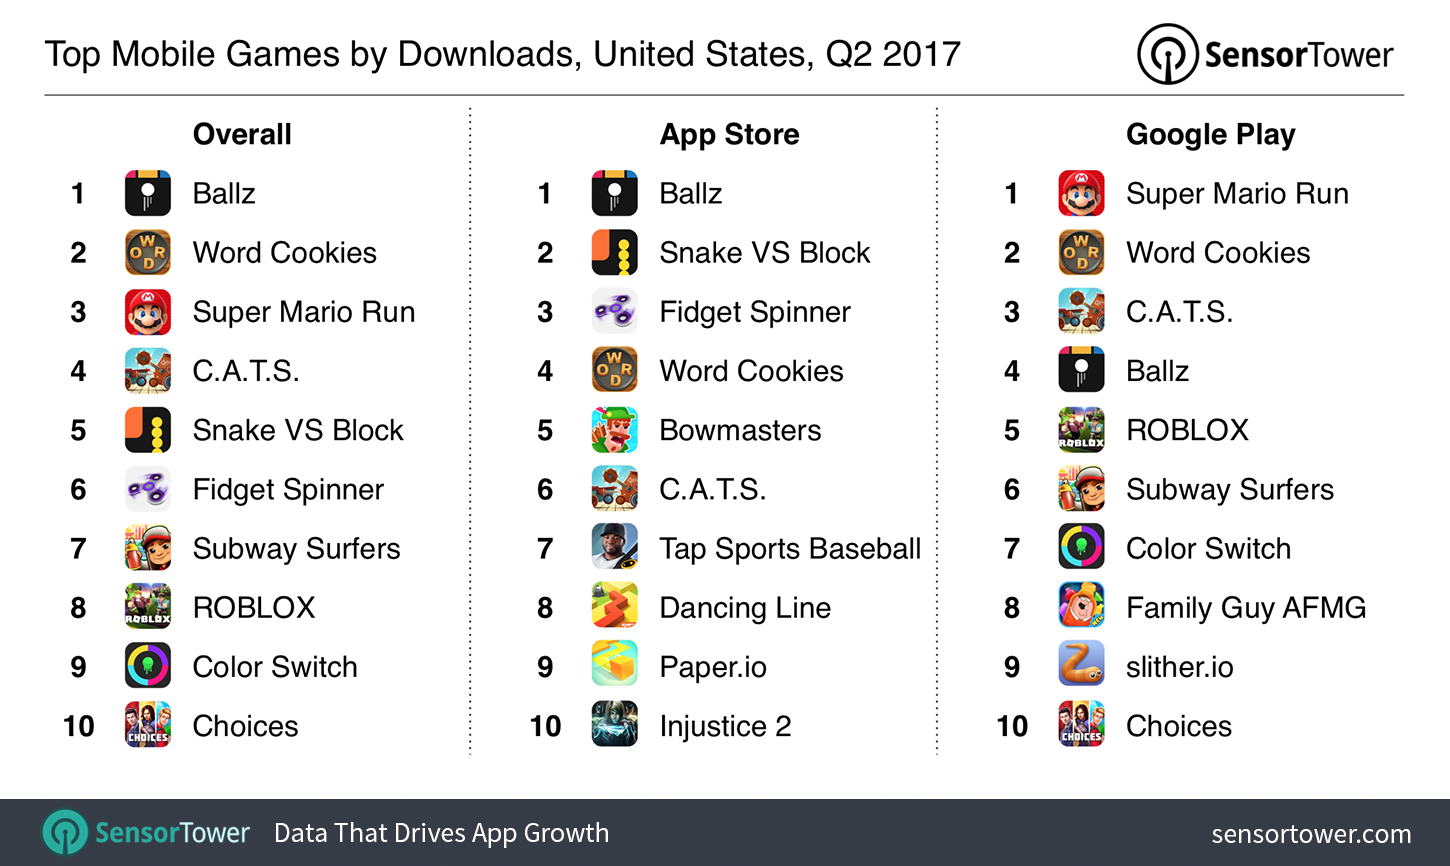 Q2 2017's Top U.S. Mobile Games by Downloads